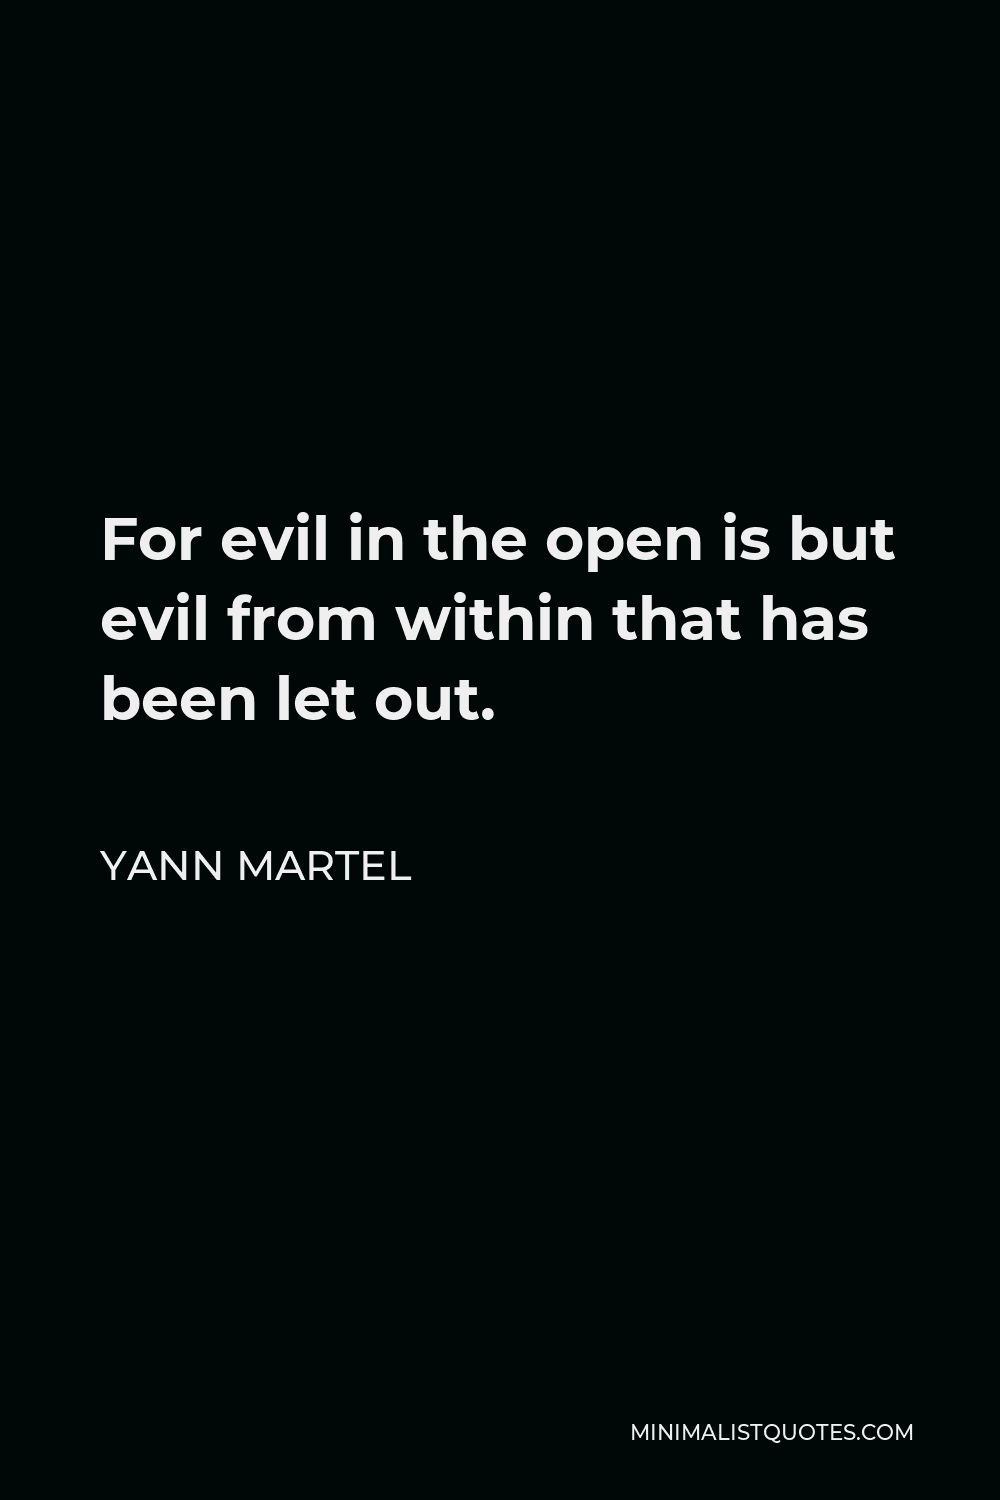 Yann Martel Quote - For evil in the open is but evil from within that has been let out.